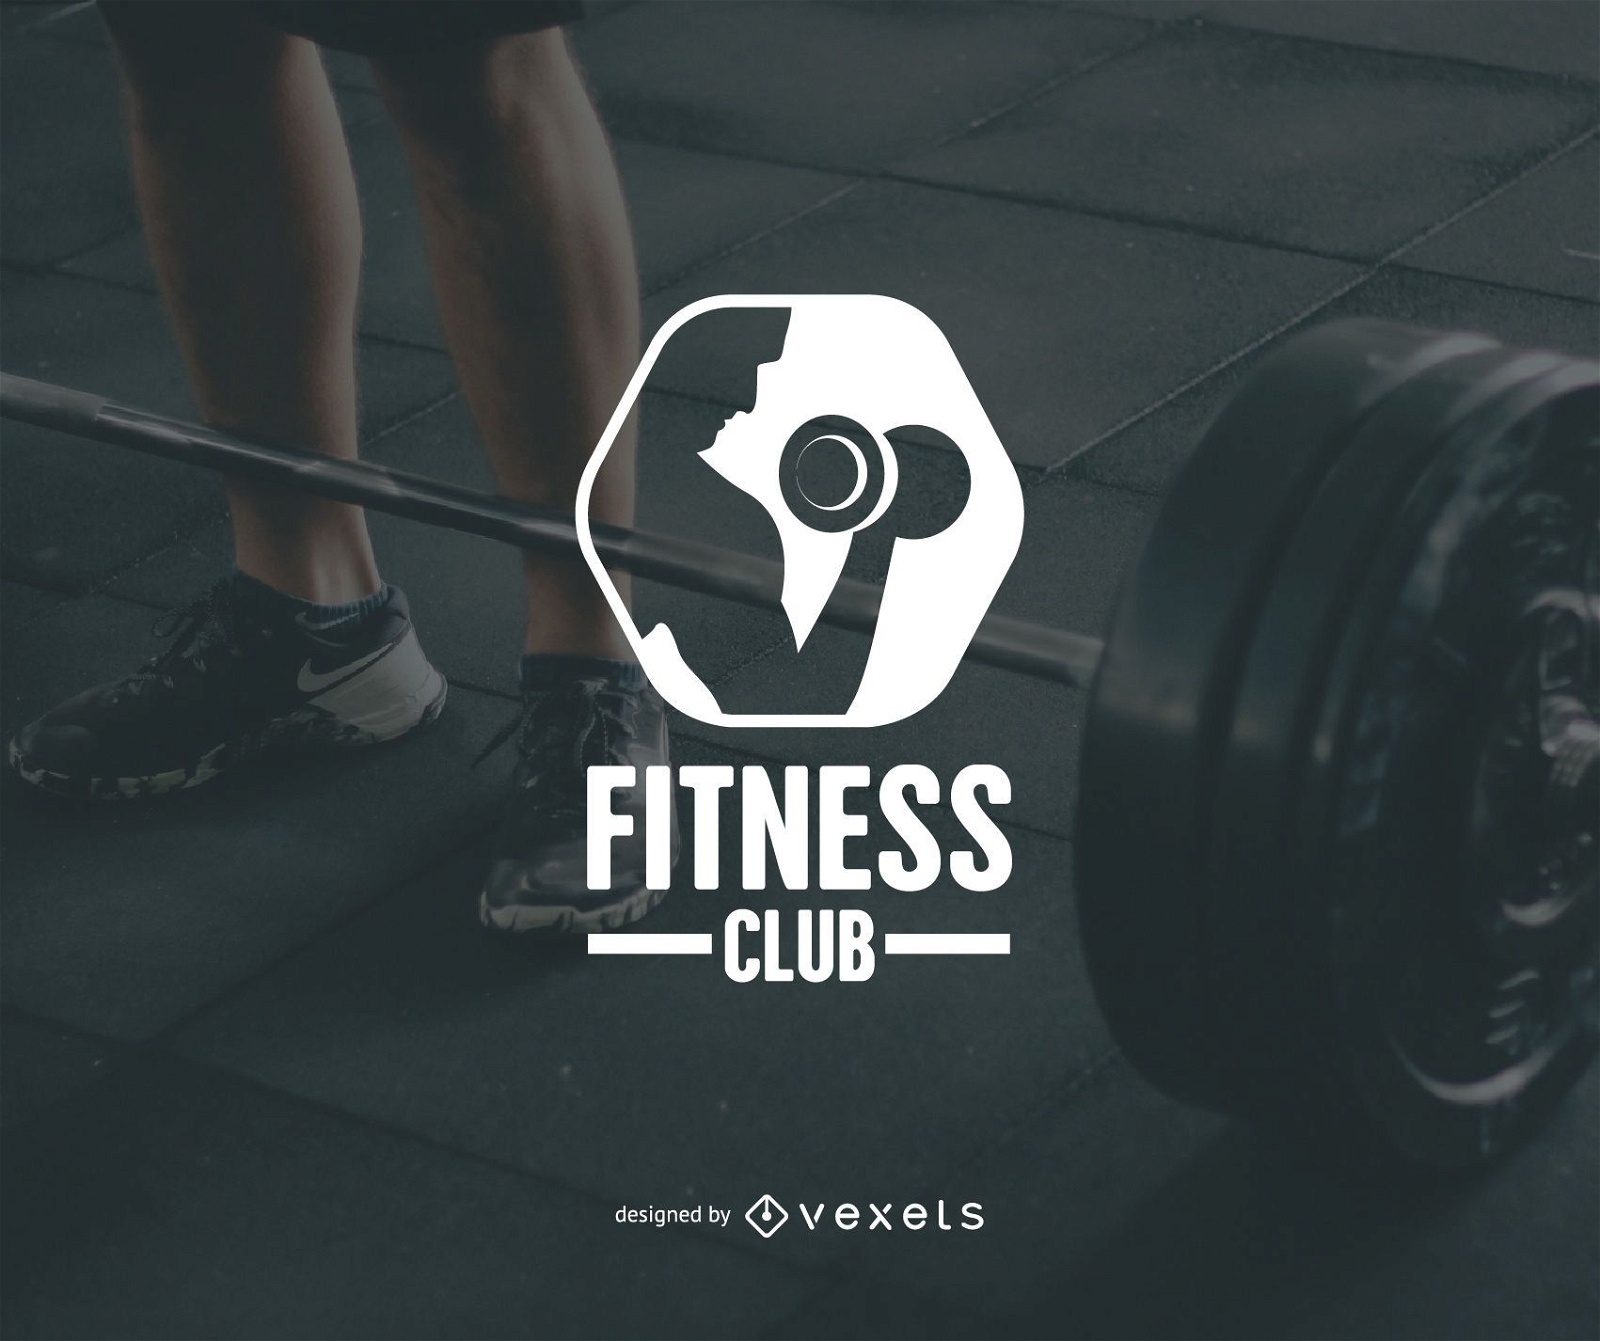 Best fonts for fitness logos - cljes